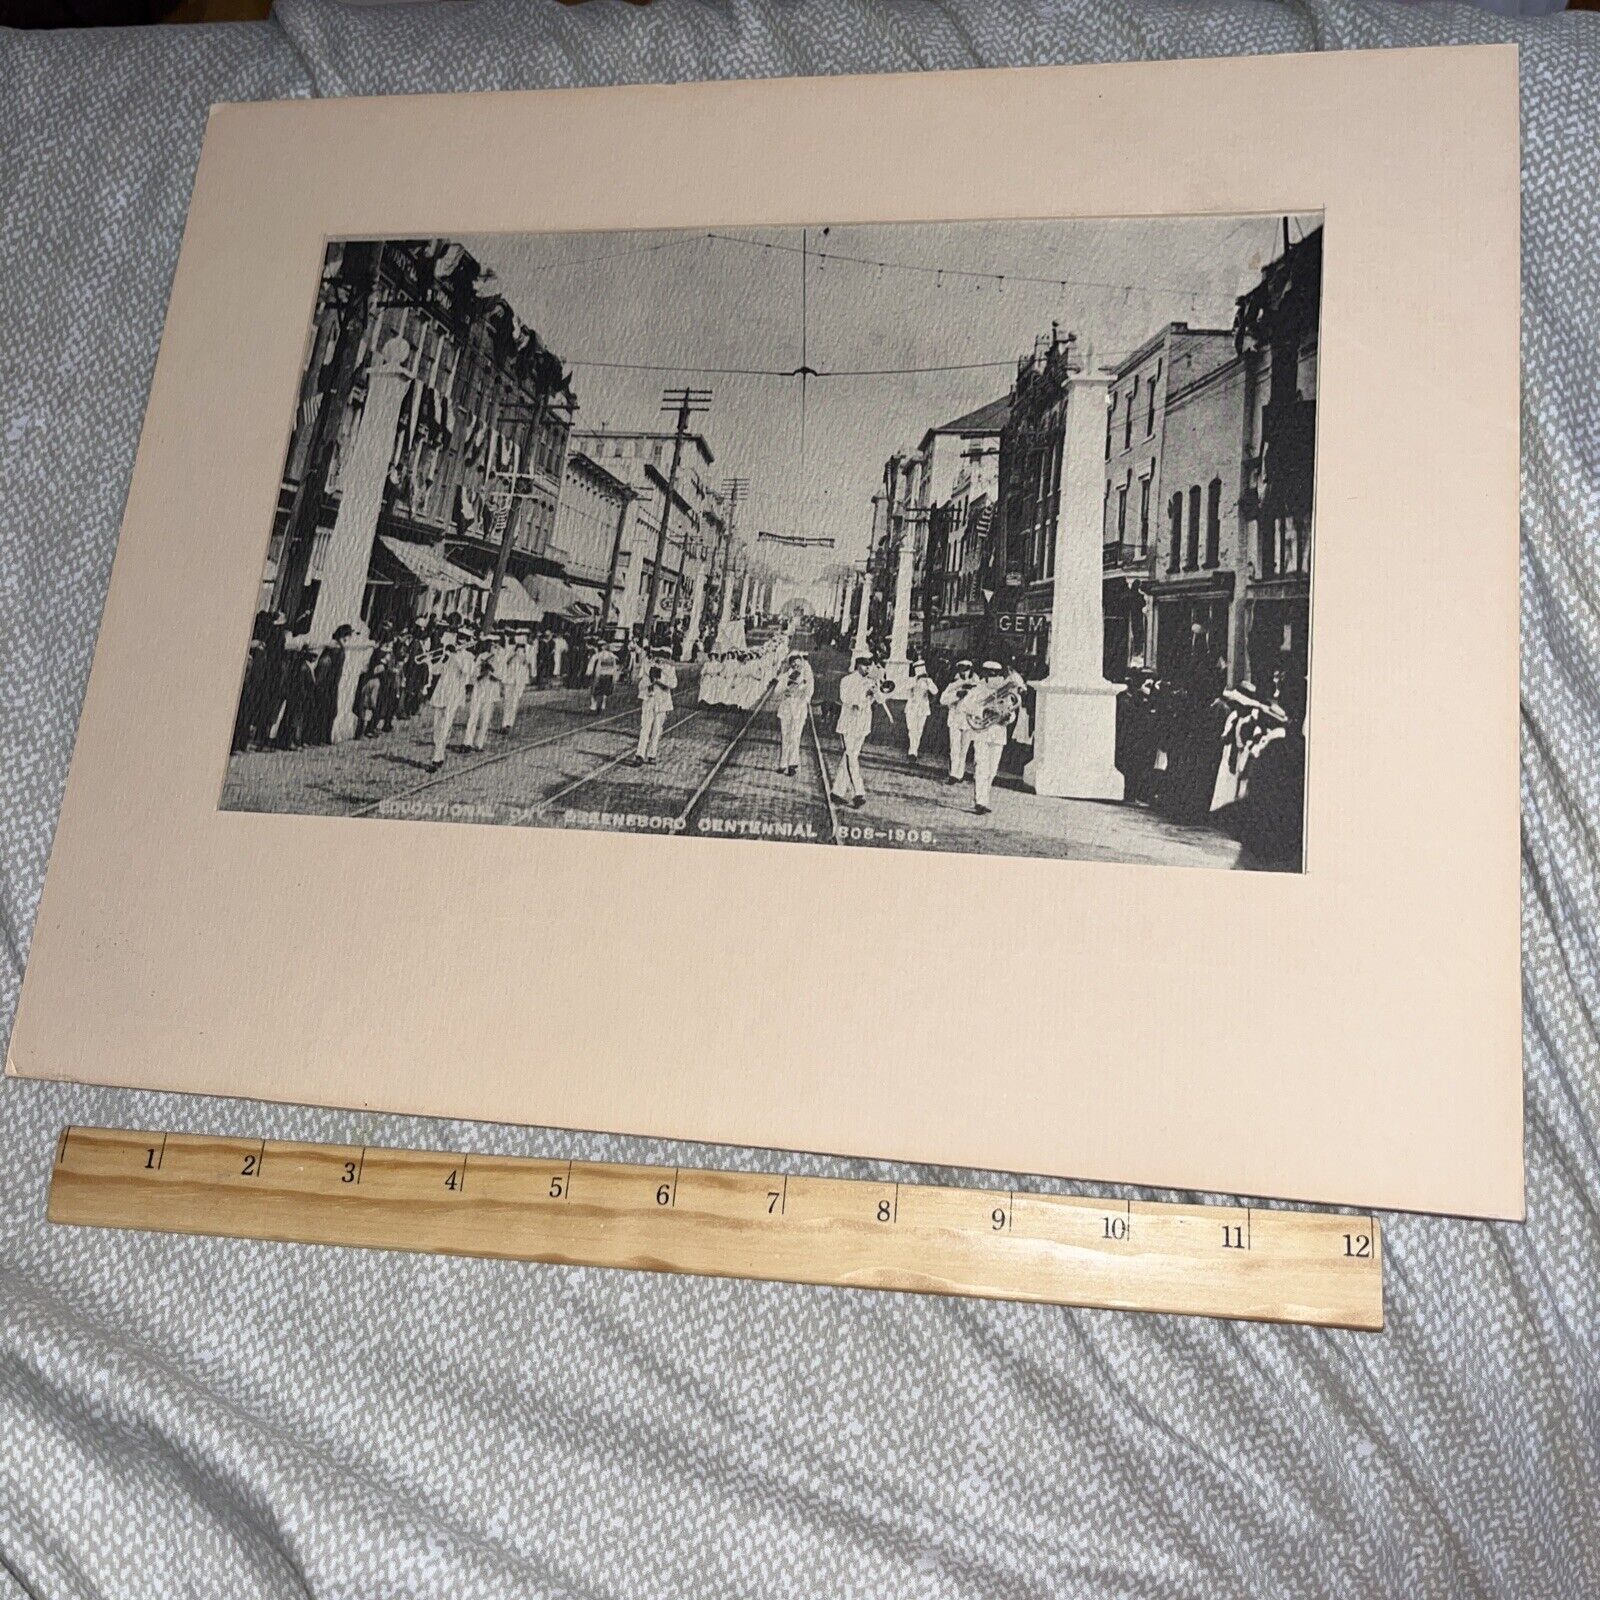 Vintage Matted Print: Educational Day Greensboro NC Centennial 1808 - 1908